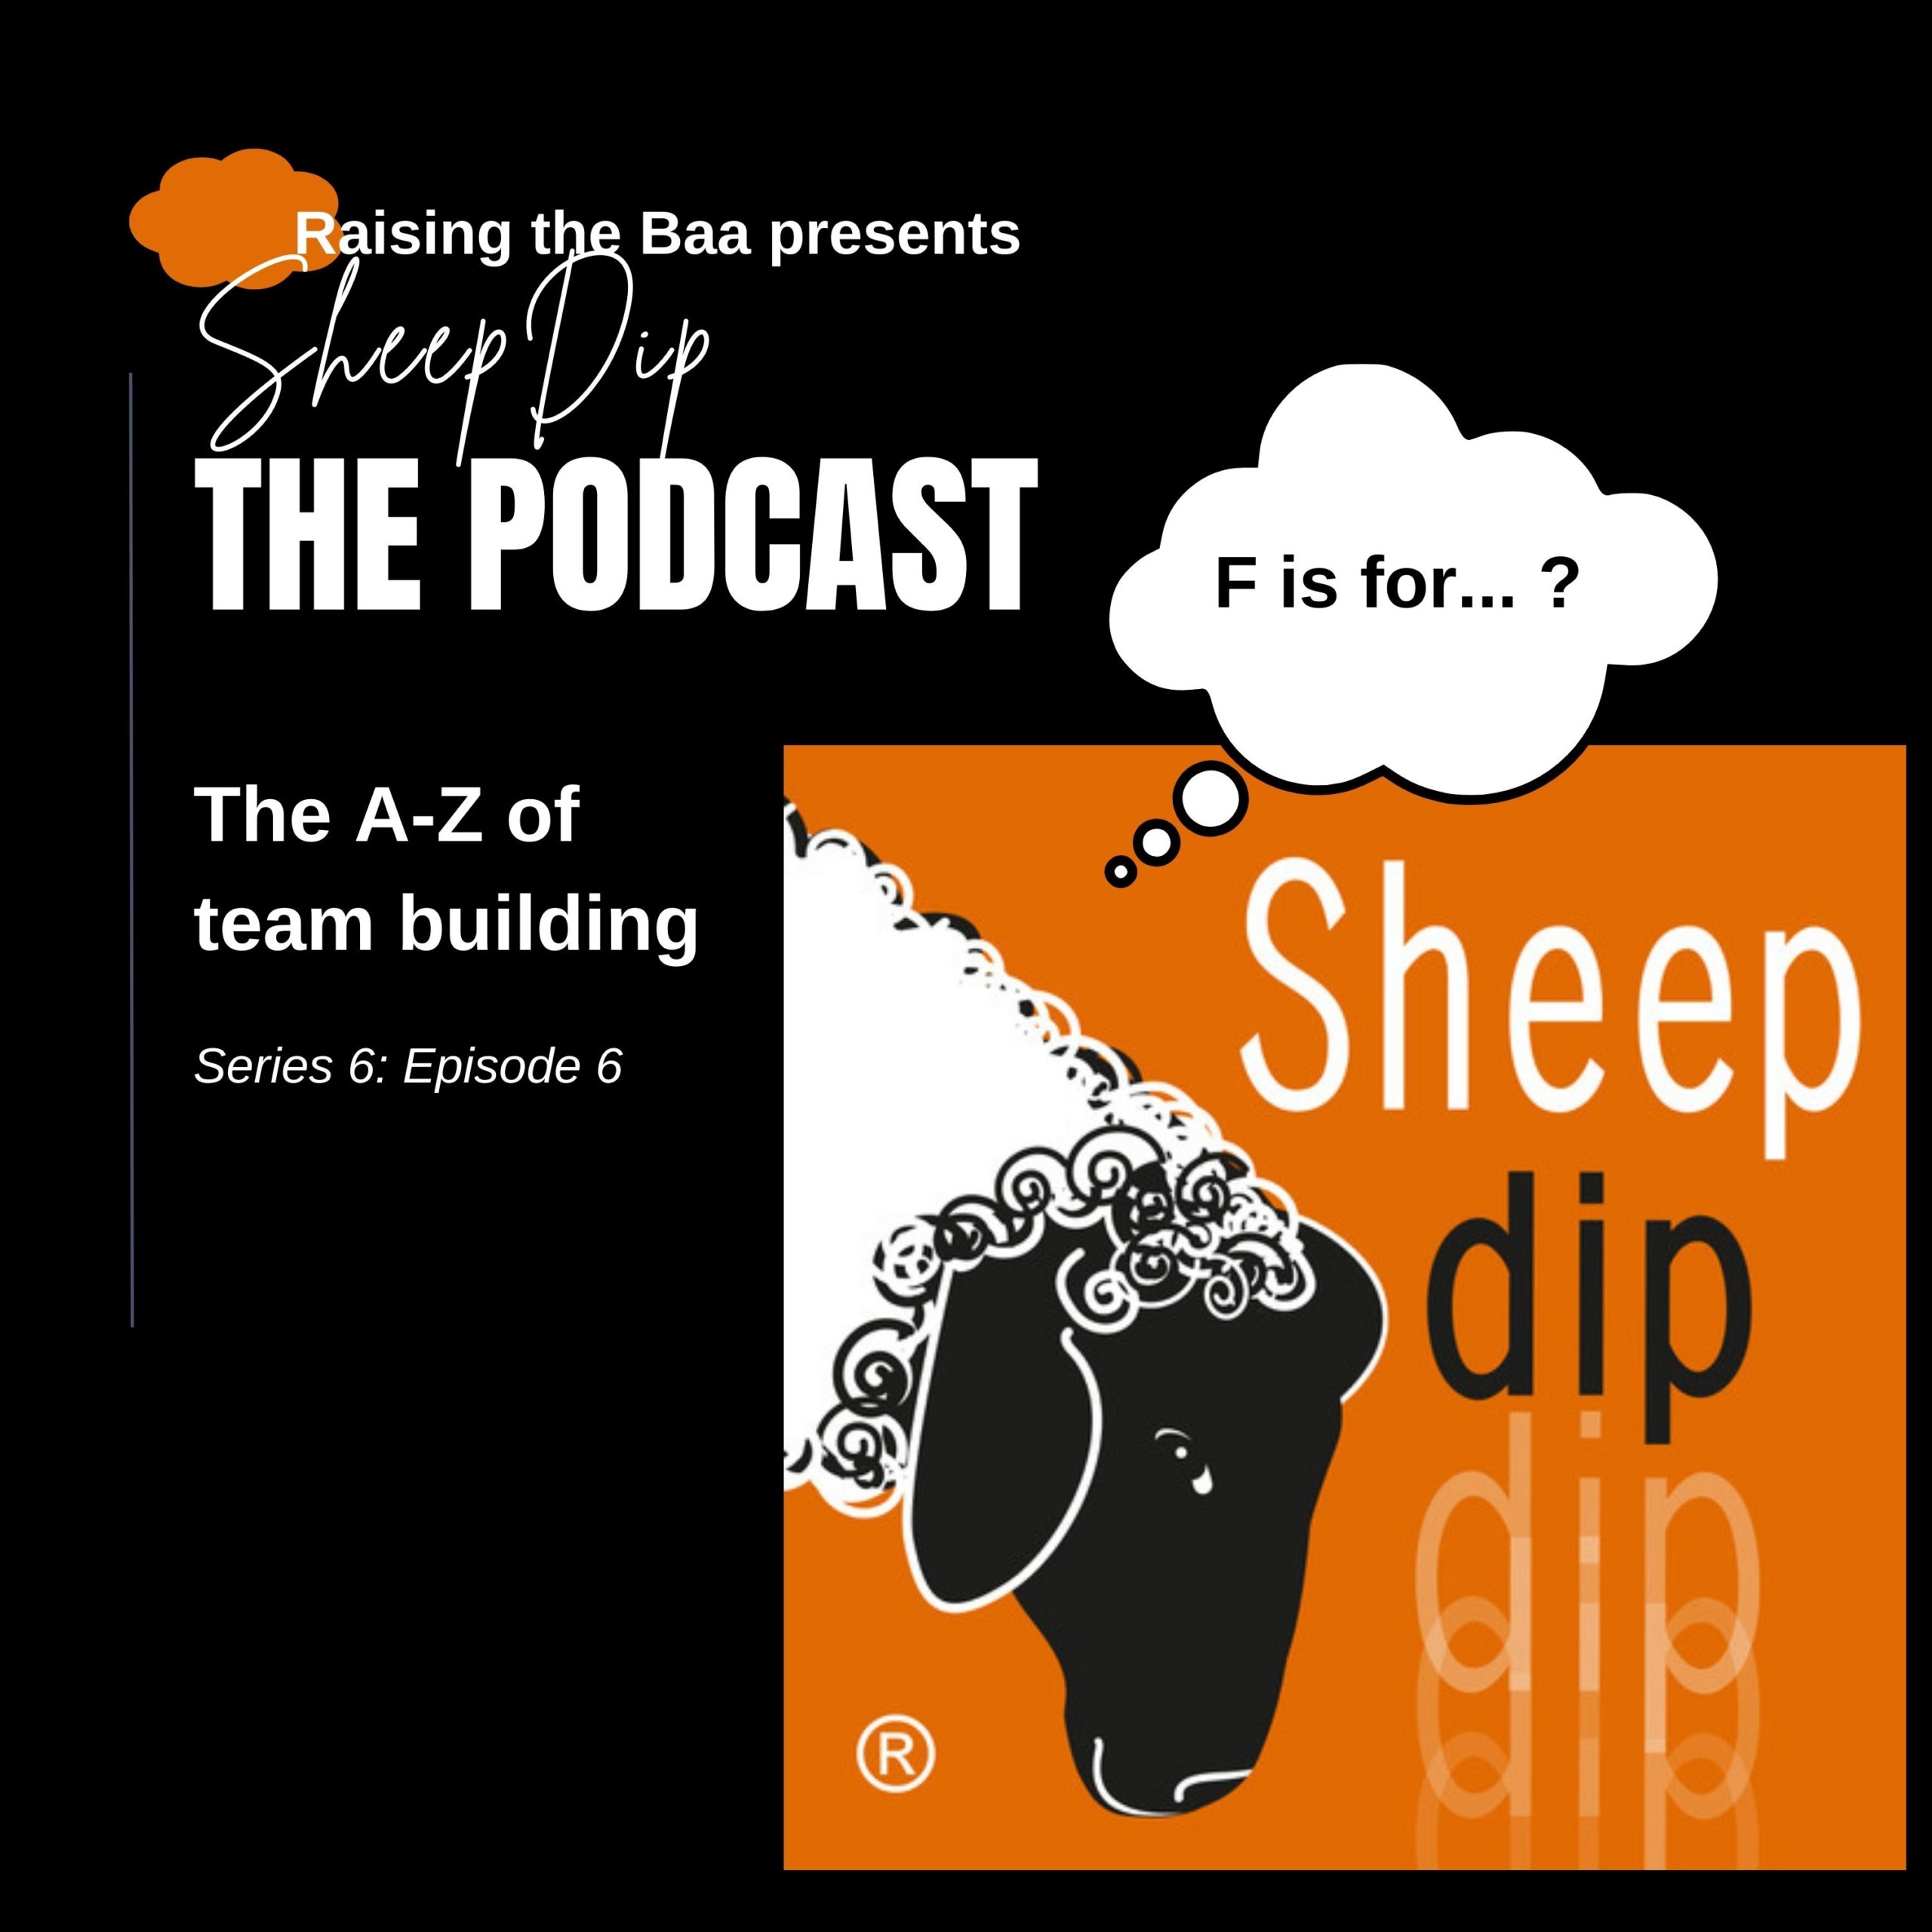 In team building,  F is for ...-Podcast cover 2